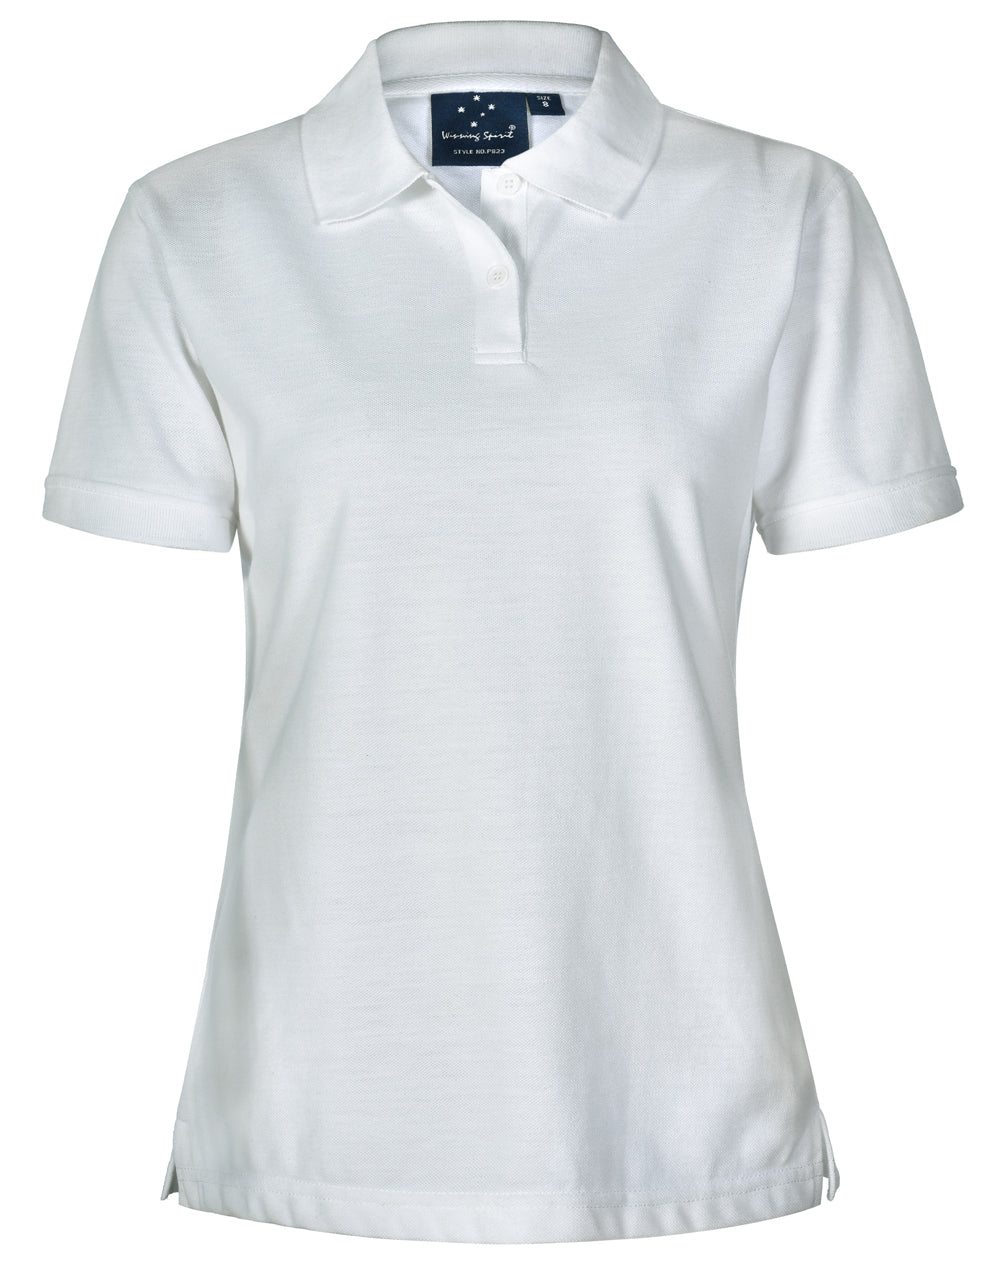 Deluxe Ladies Short Sleeve Polo Shirt - made by AIW